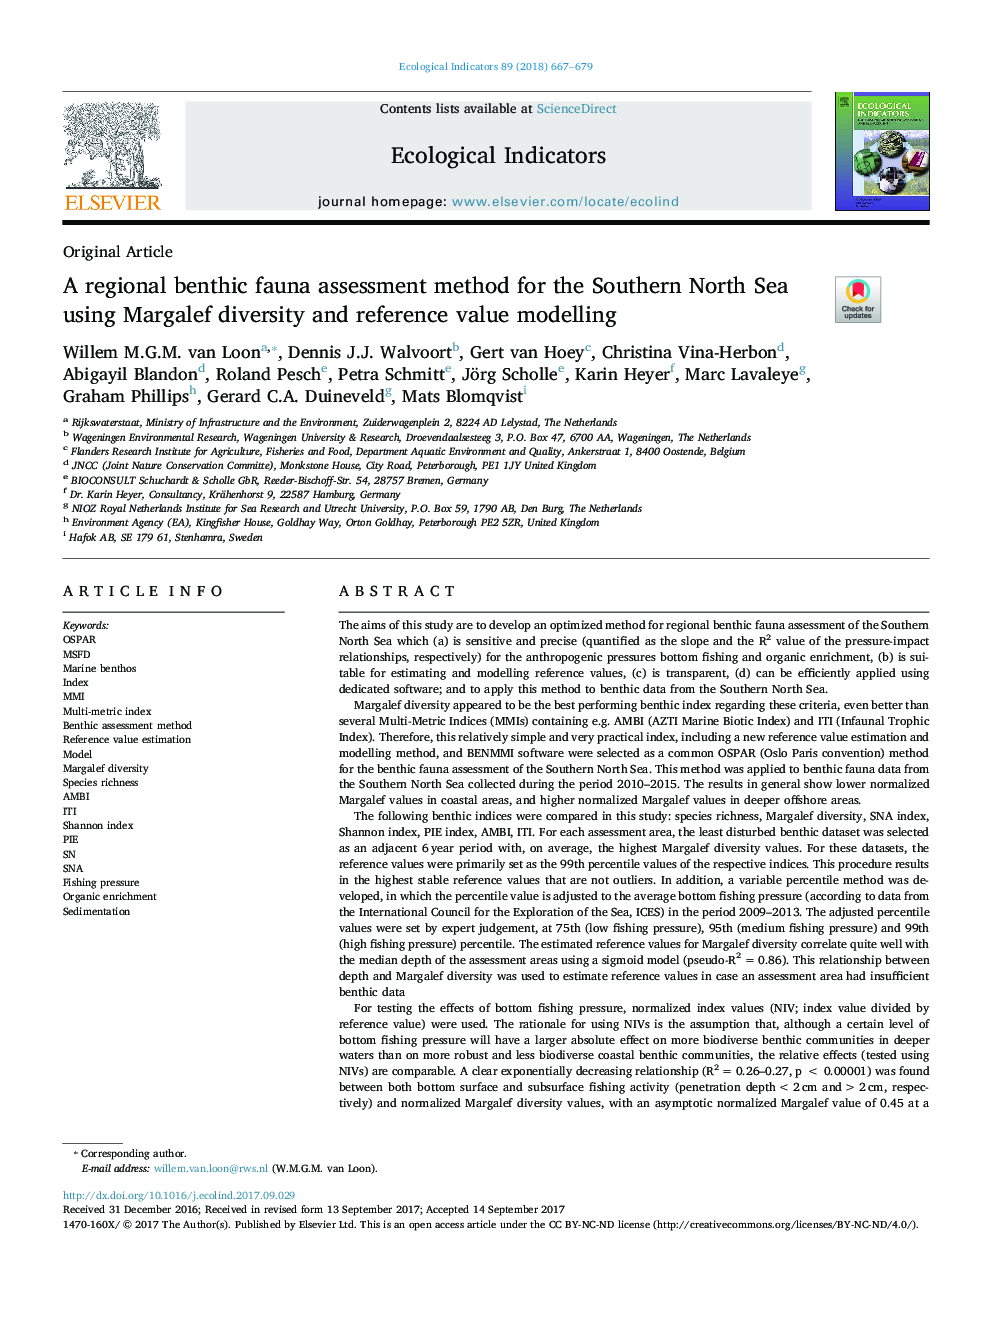 A regional benthic fauna assessment method for the Southern North Sea using Margalef diversity and reference value modelling